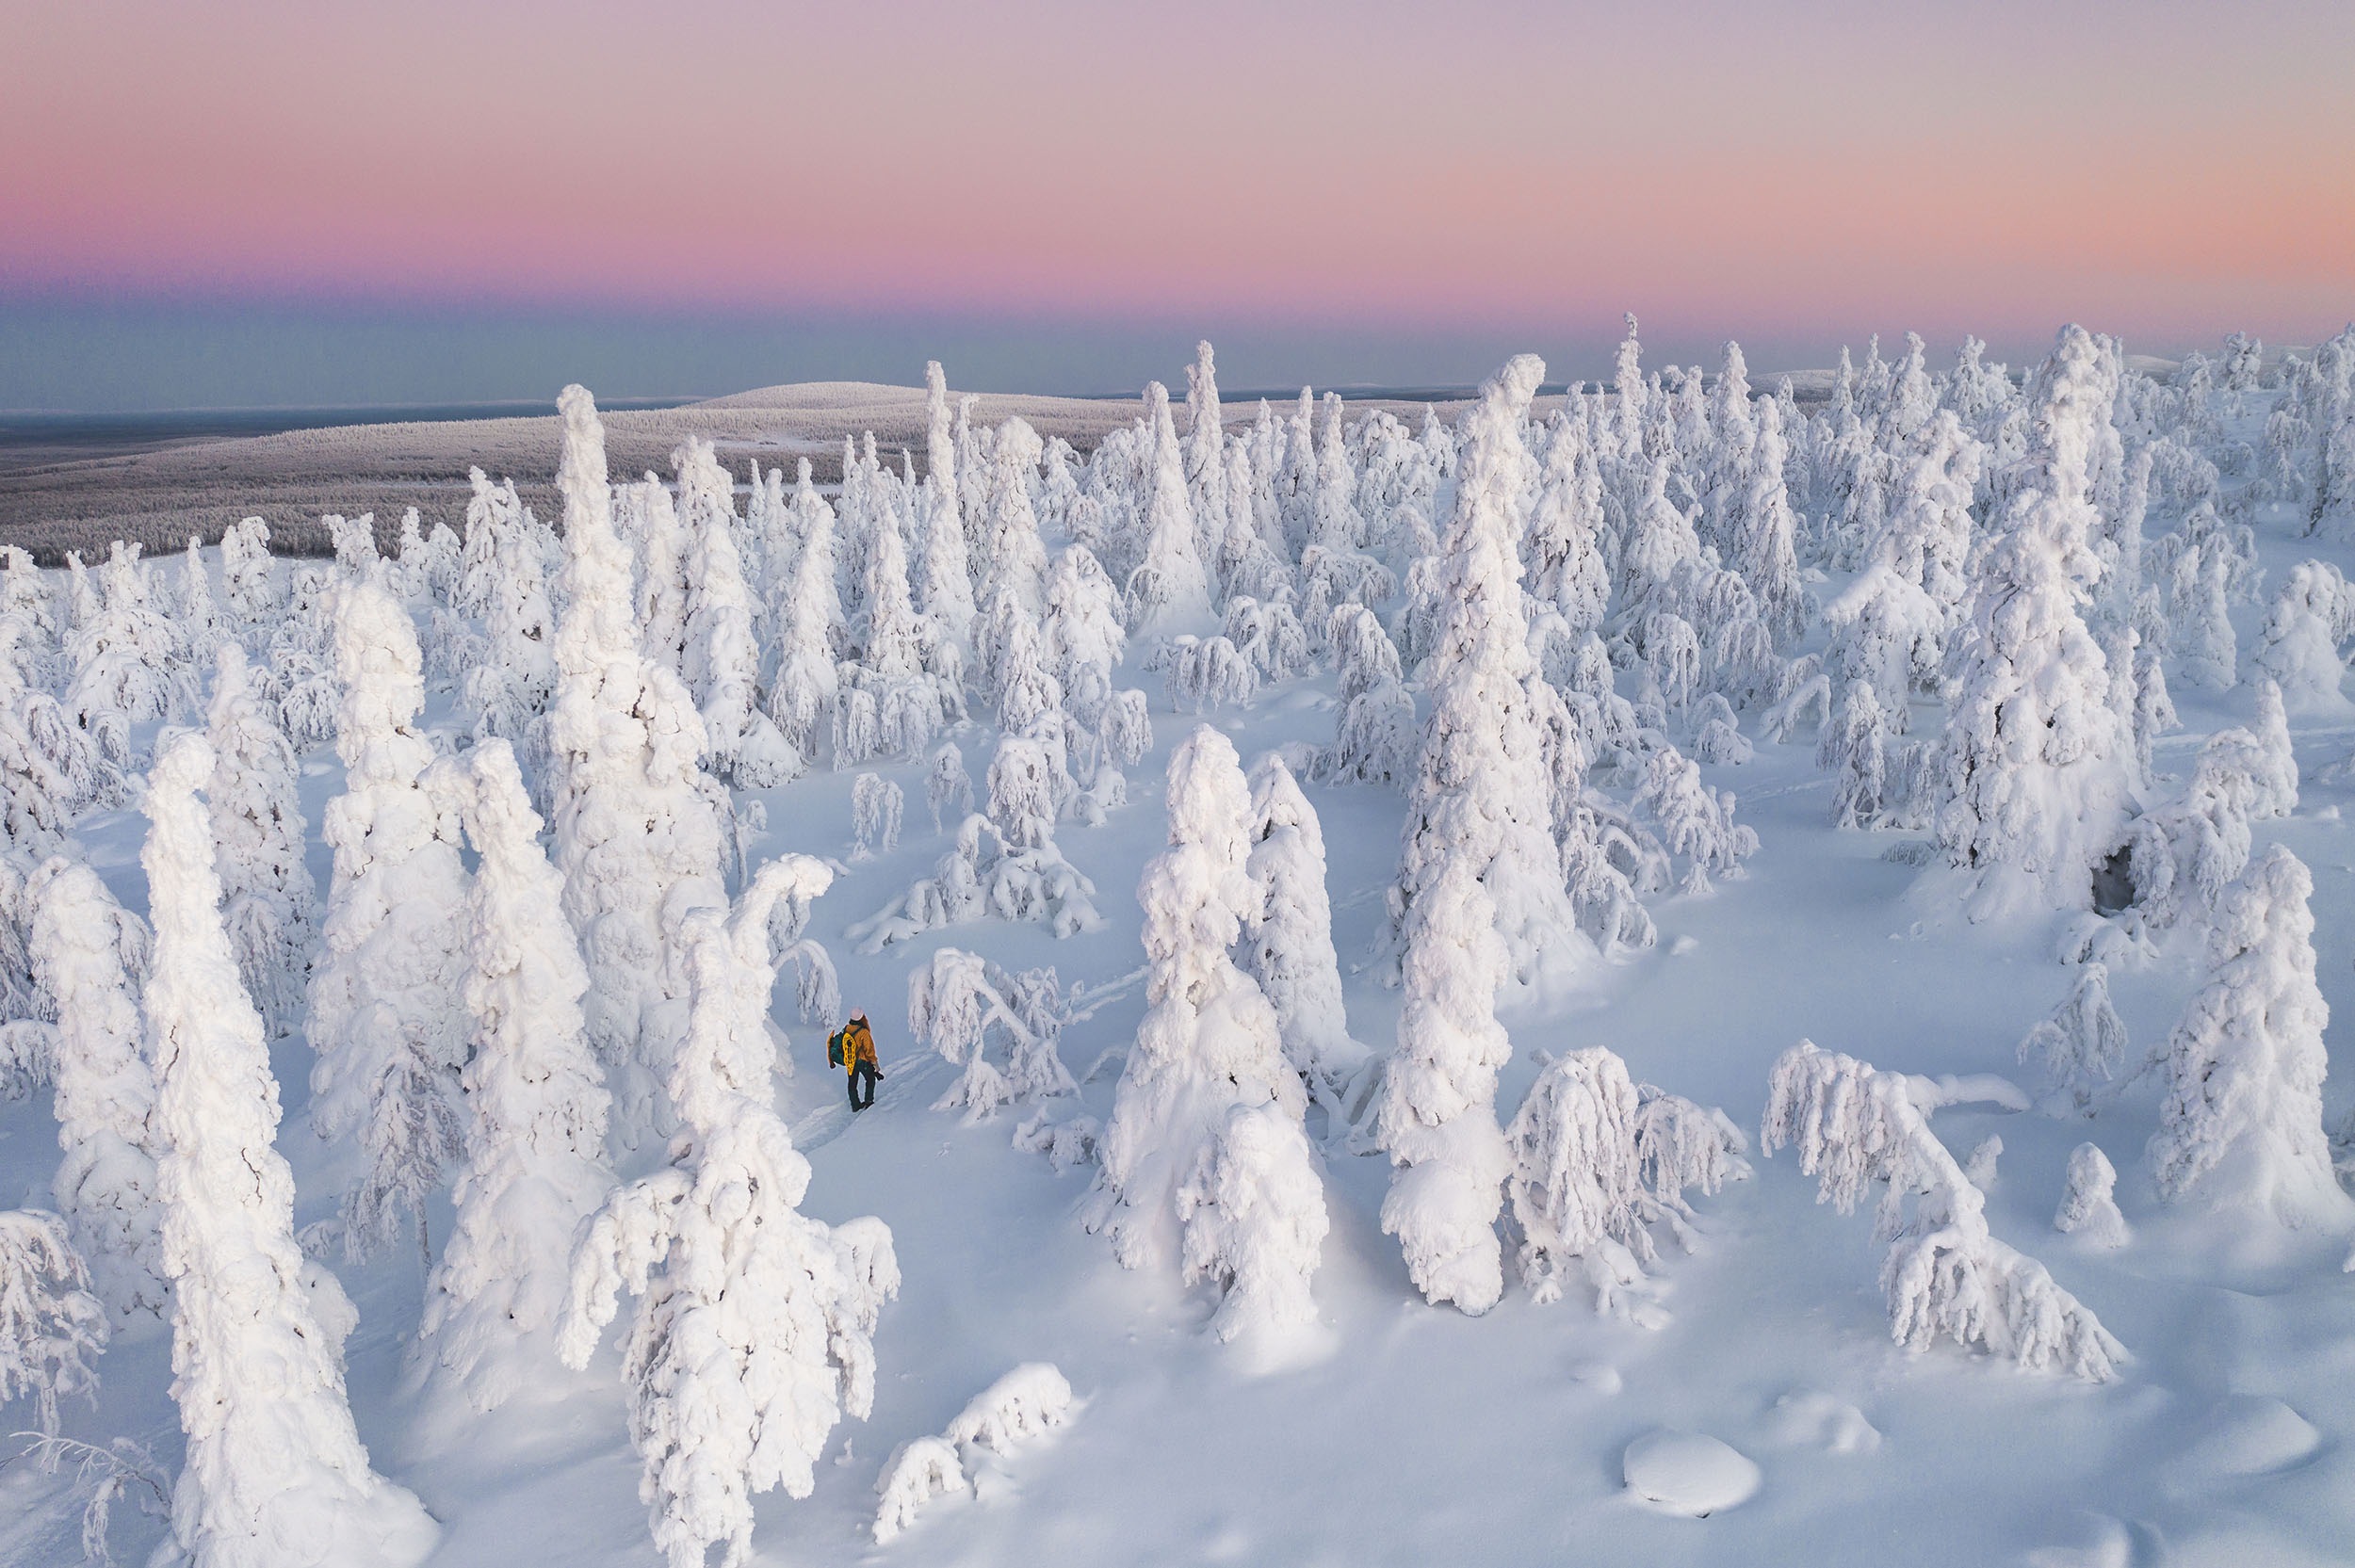 How Snowy is Finland?